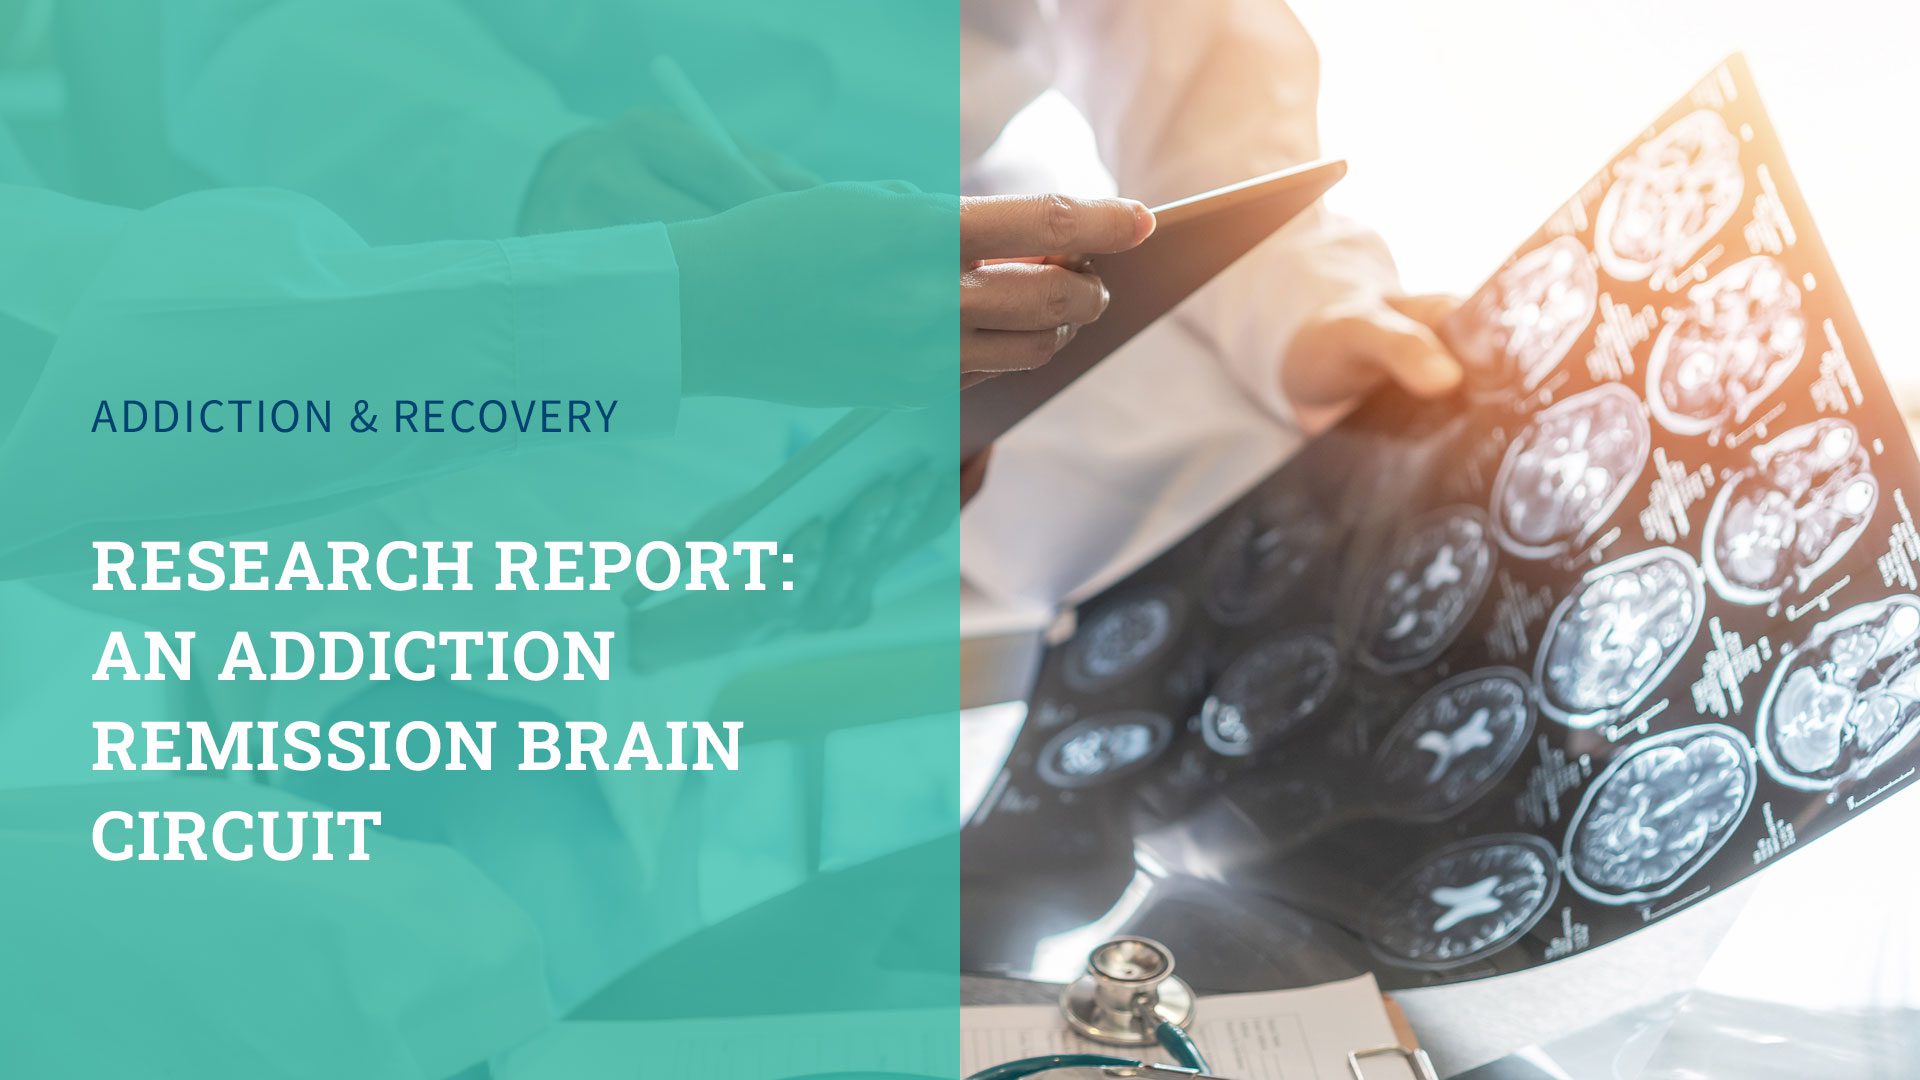 Research Report: An Addiction Remission Brain Circuit